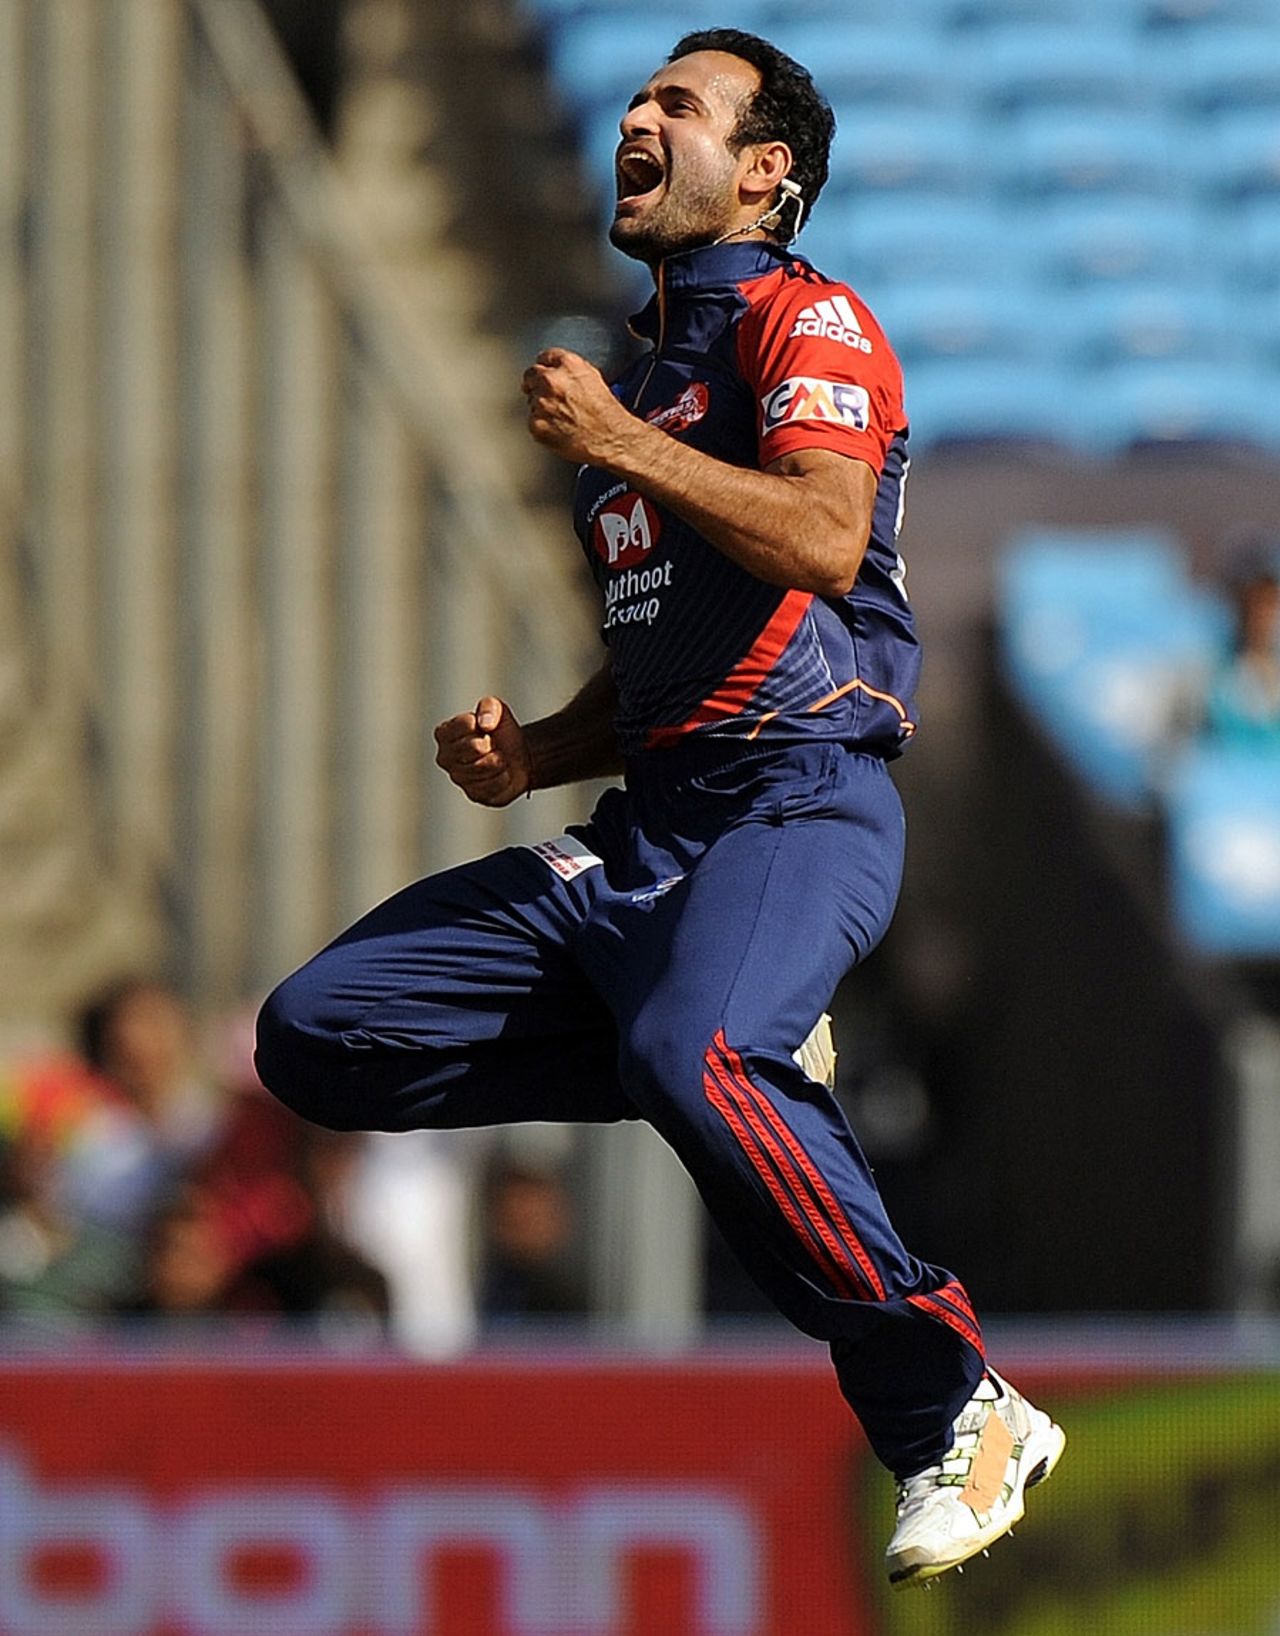 Irfan Pathan celebrates after striking in the first over, une Warriors v Delhi Daredevils, IPL, Pune, April 24, 2012